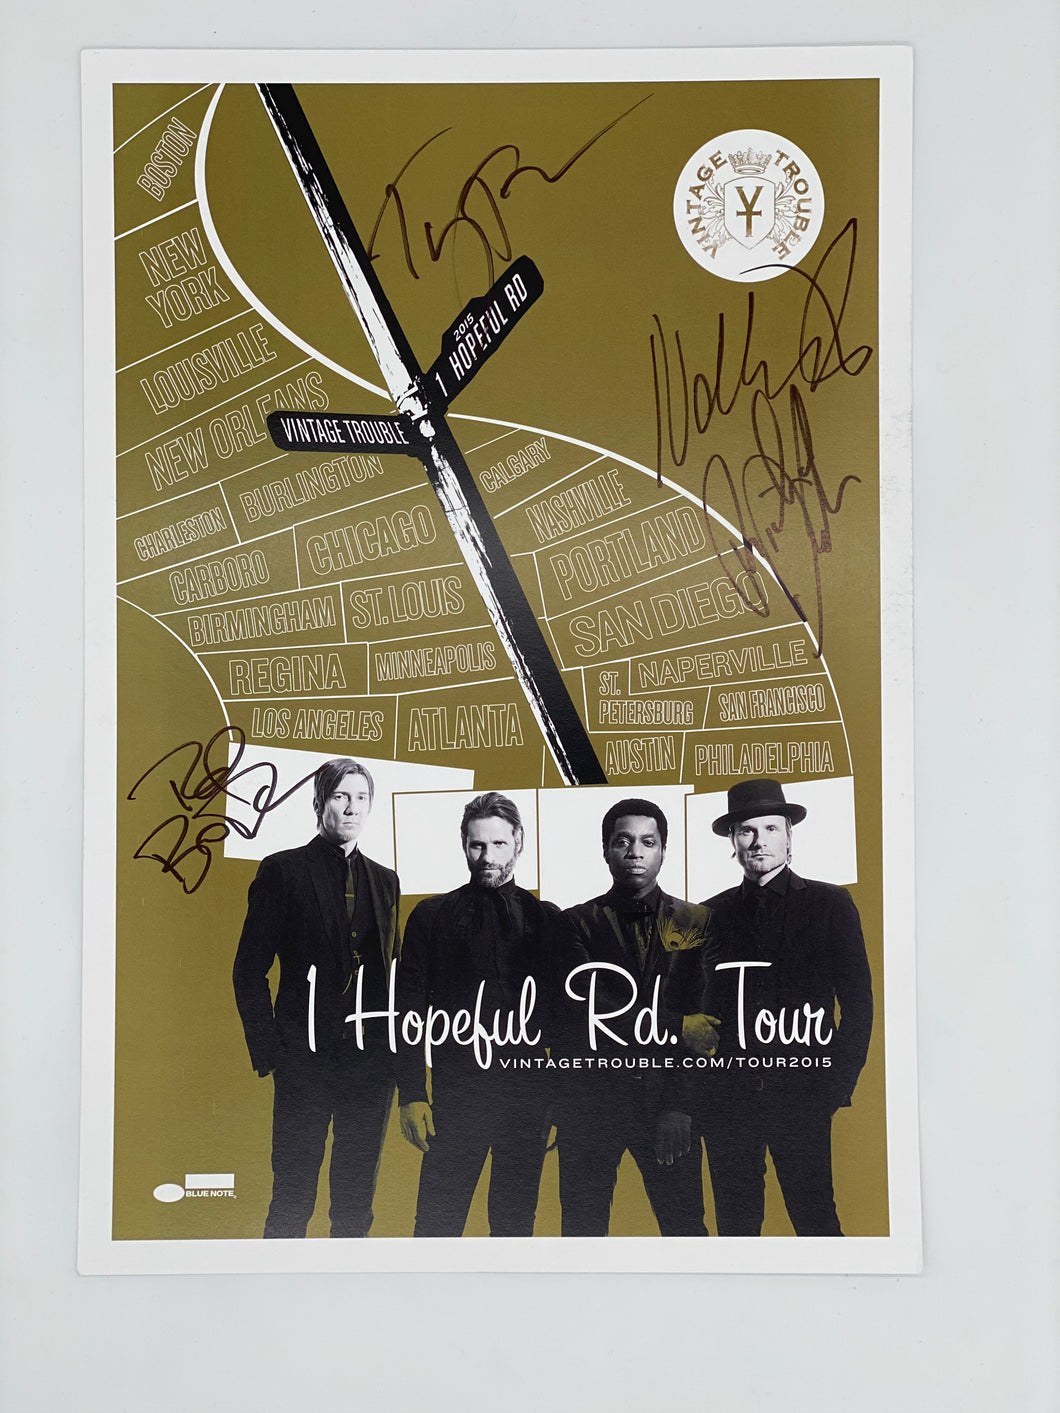 1 Hopeful Rd Tour Poster SIGNED BY ALL 4 MEMBERS